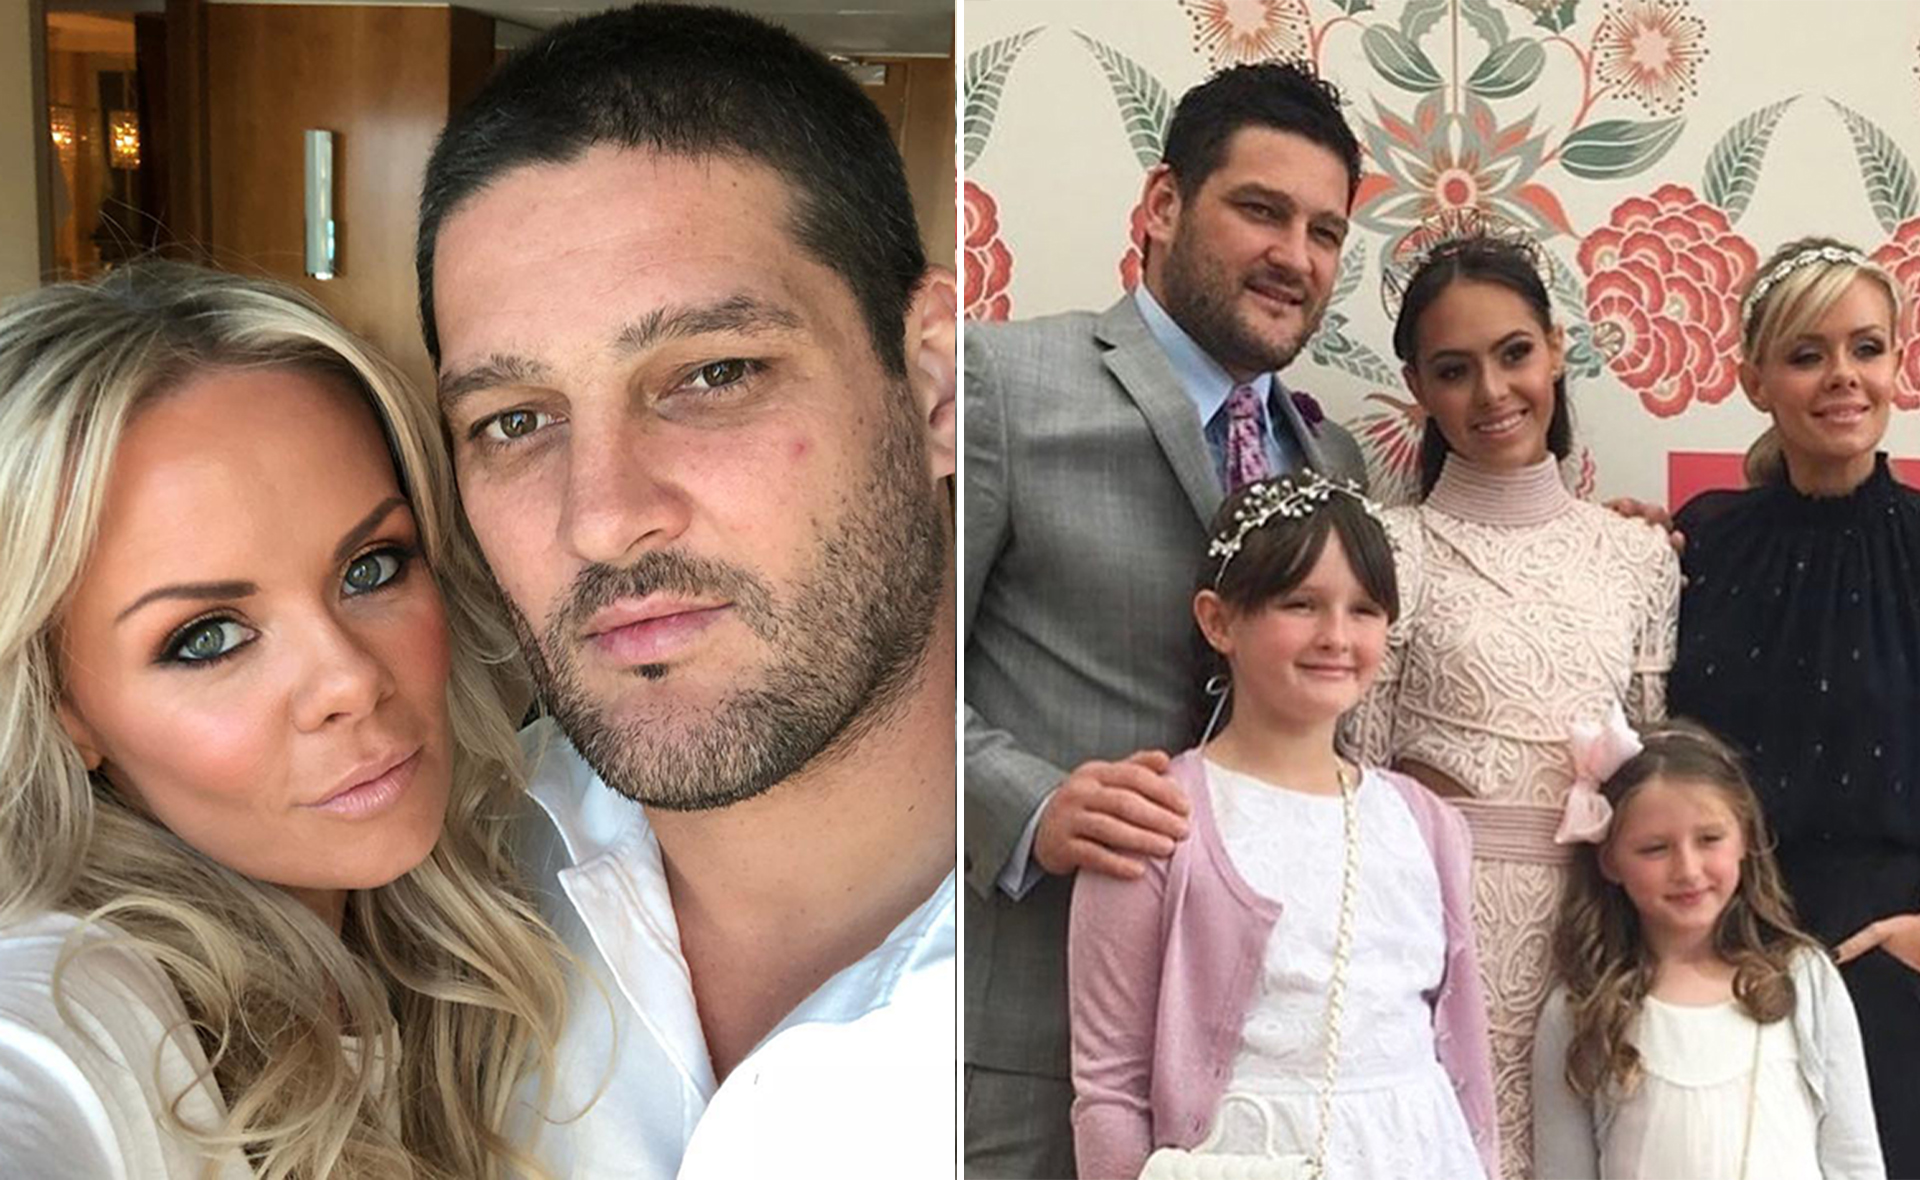 Four kids, a divorce and a re-engagement later, AFL star Brendan Fevola and his wife Alex couldn’t be happier